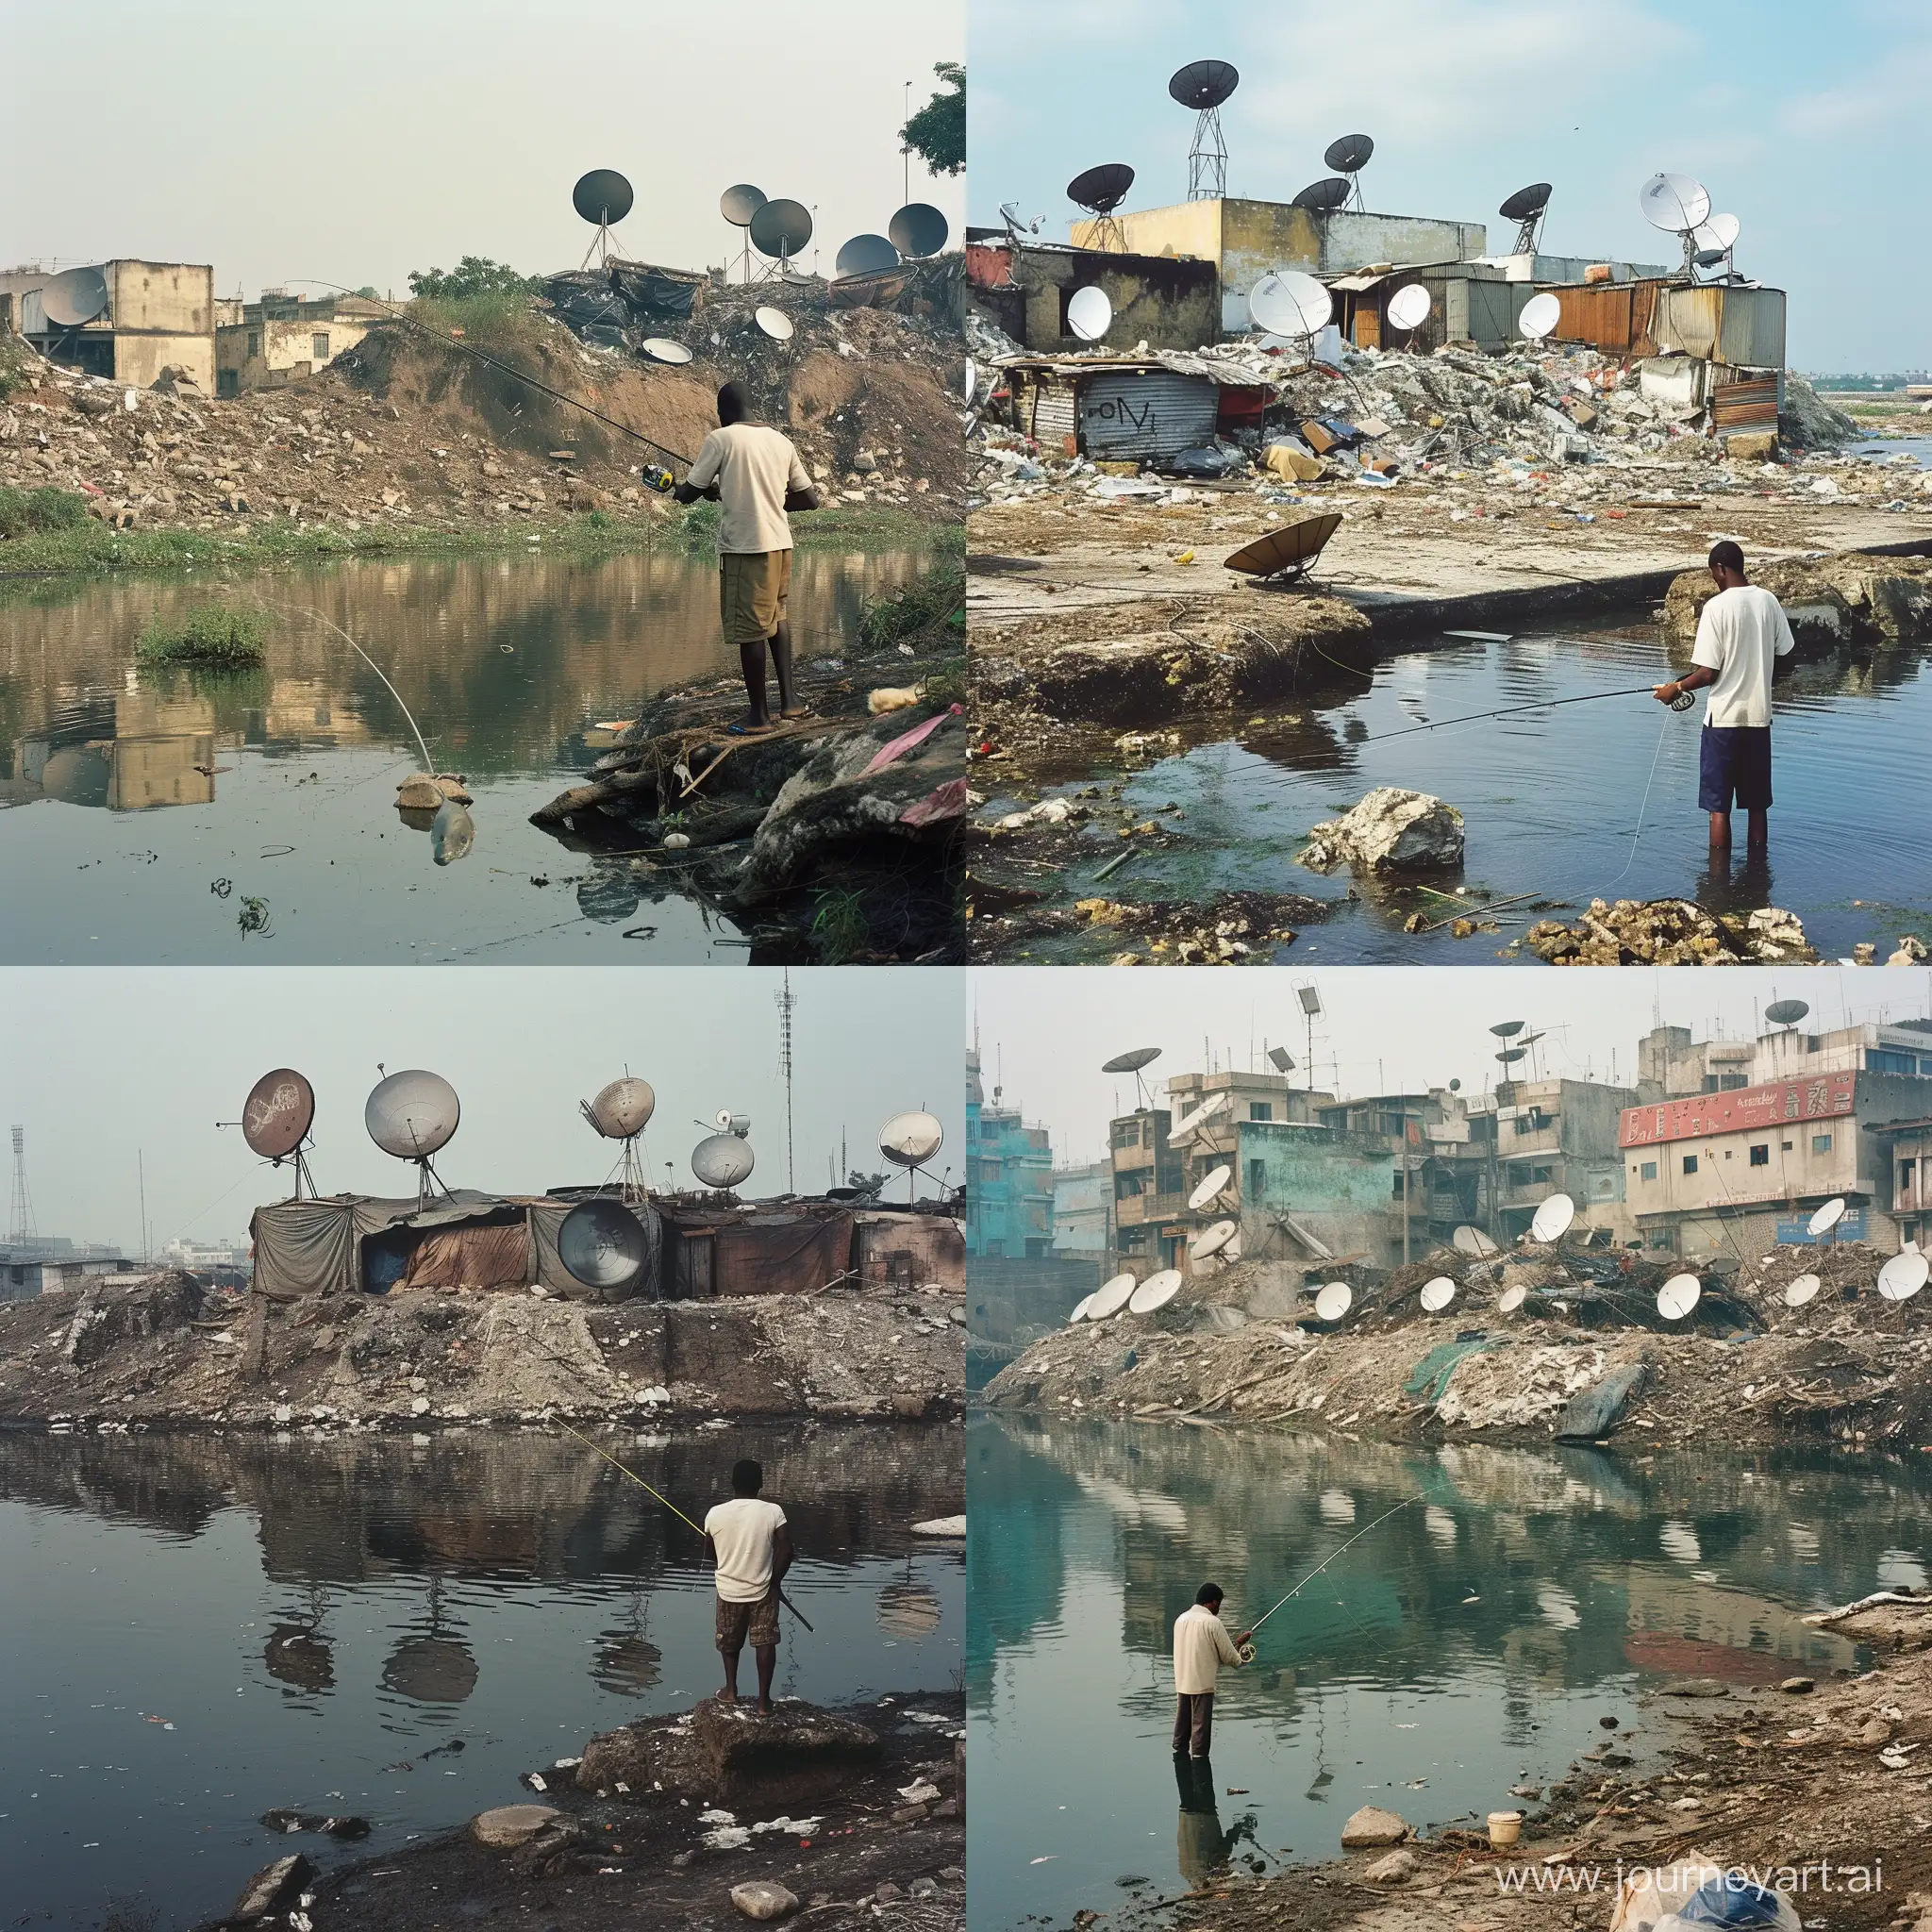 Serene-Fishing-Amidst-Urban-Decay-with-Satellite-Dishes